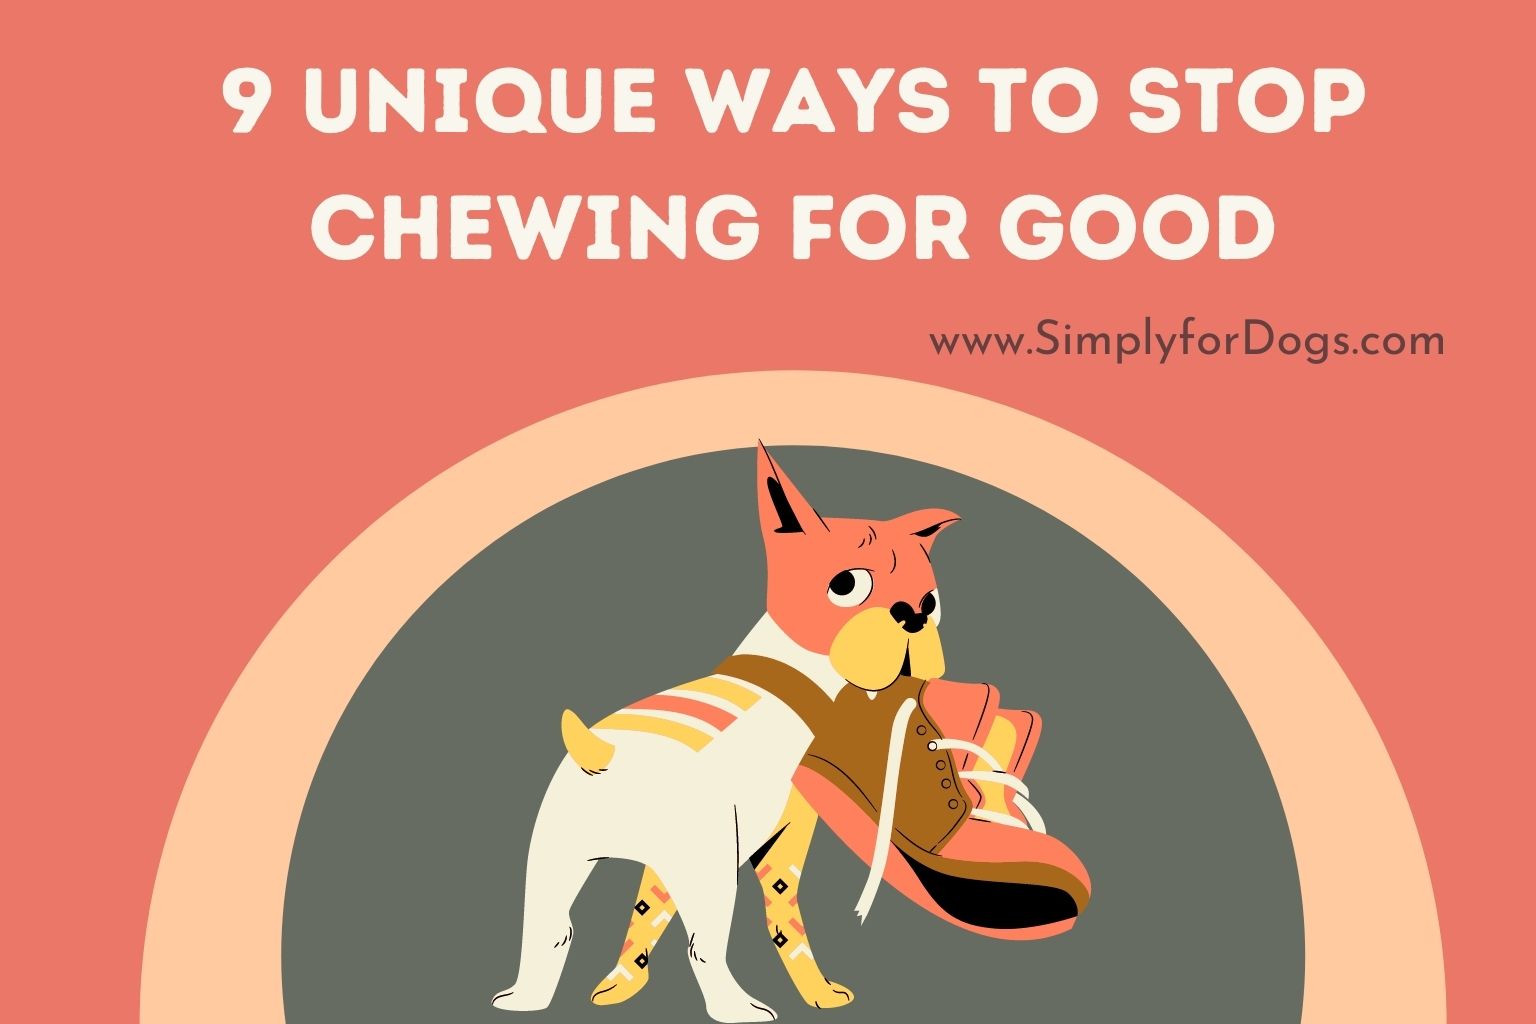 9 Unique Ways to Stop Chewing for Good